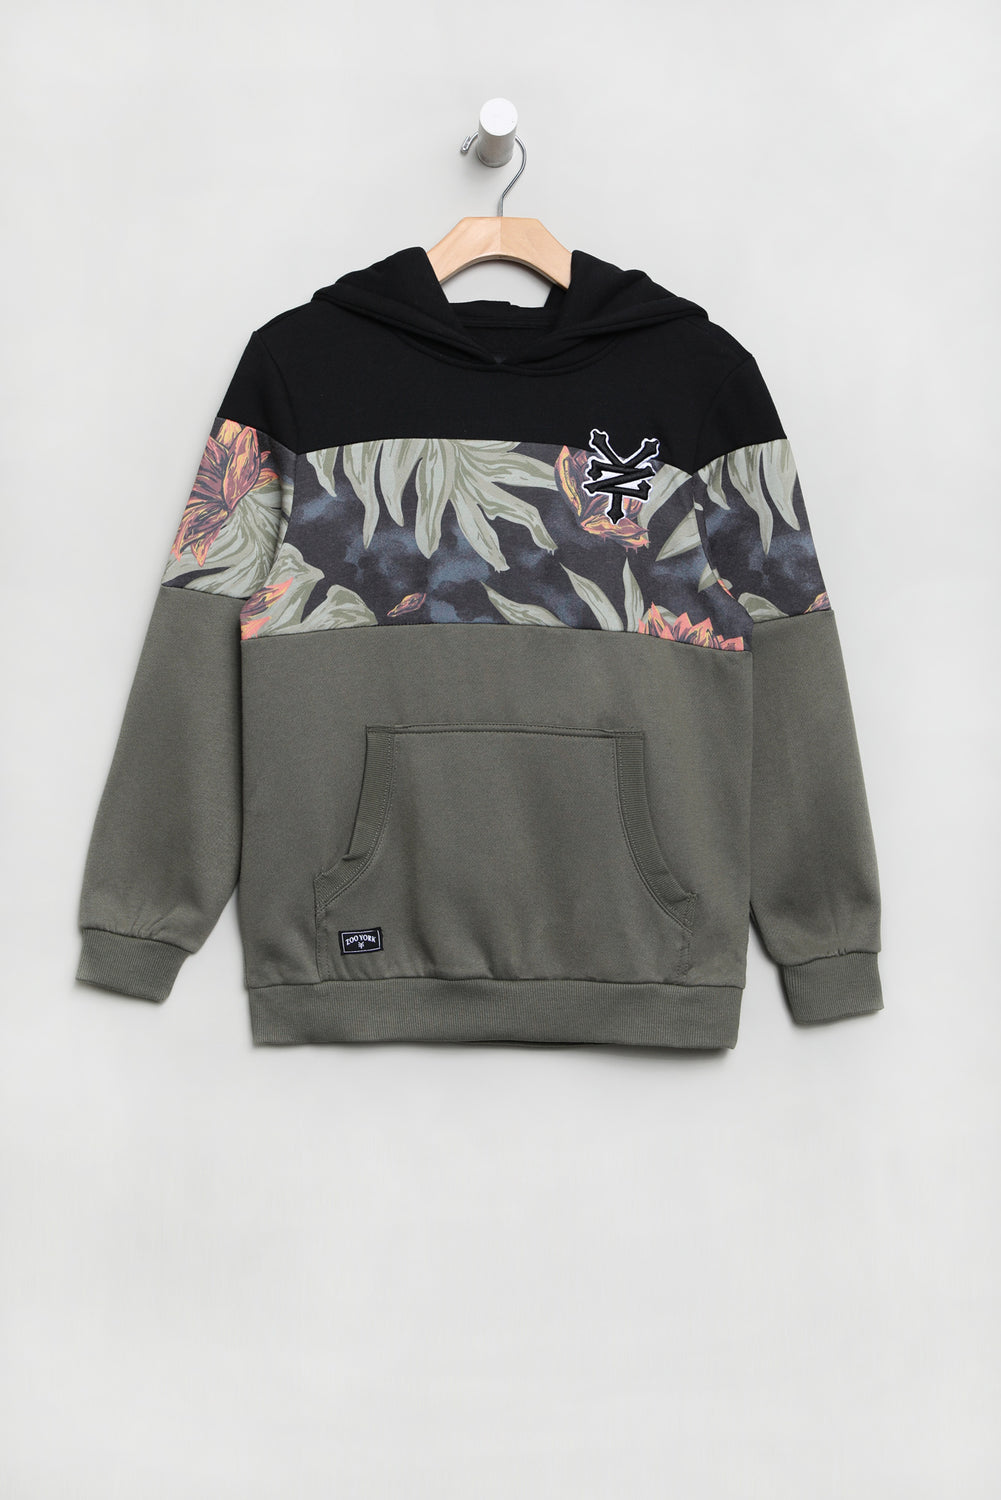 Zoo York Youth Tropical Colour Block Hoodie Zoo York Youth Tropical Colour Block Hoodie